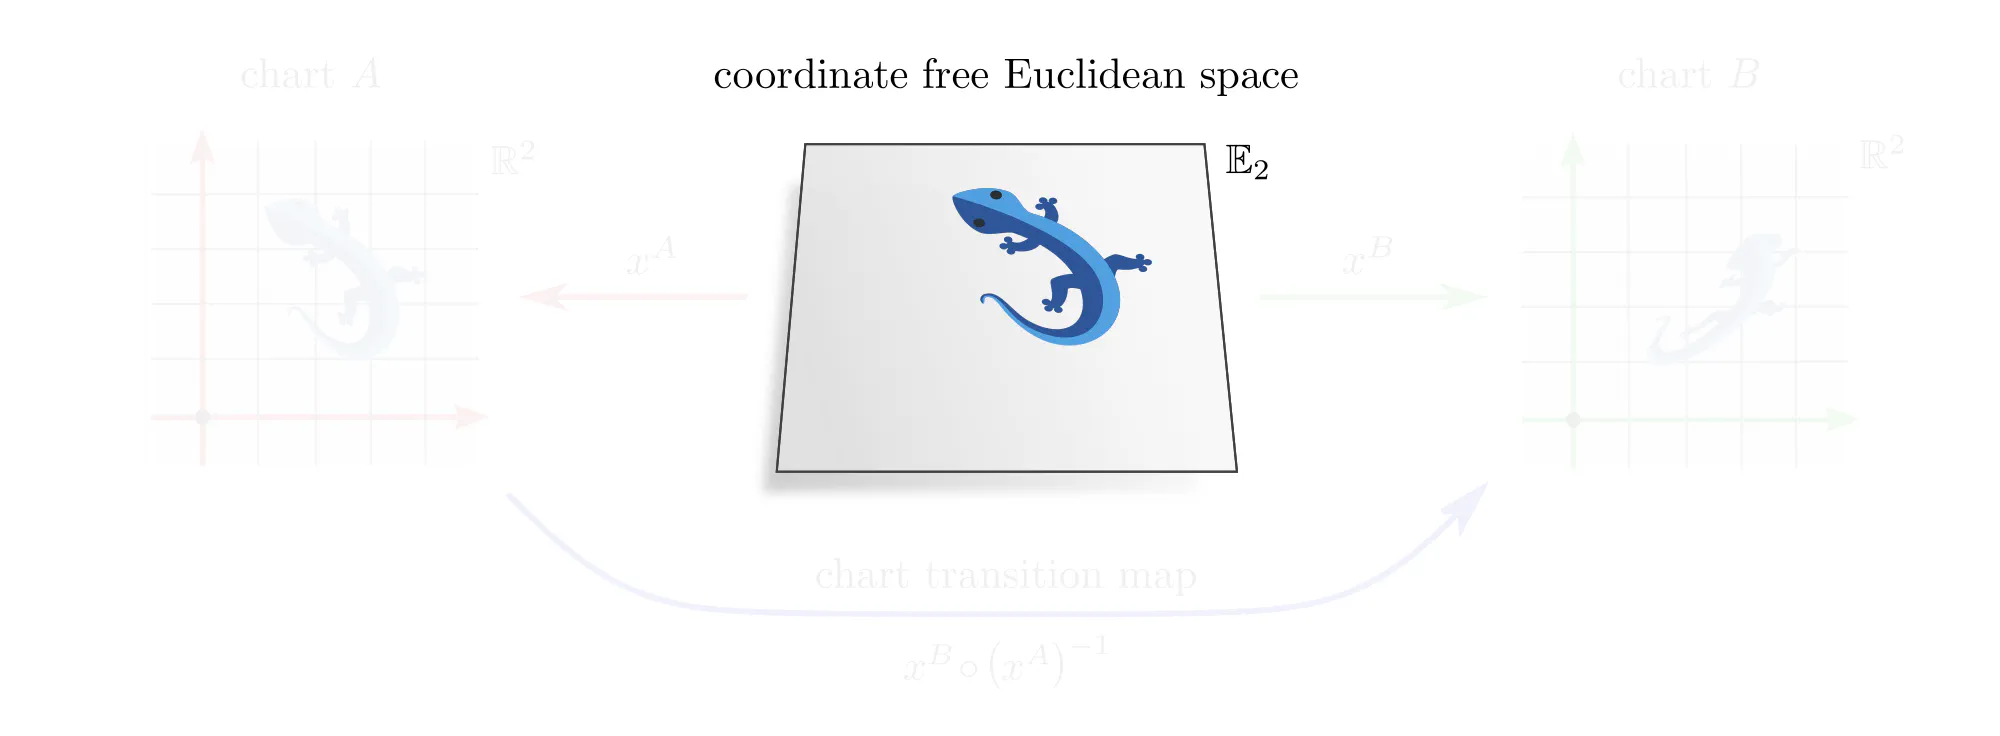 Assigning coordinates to Euclidean spaces, slide 1